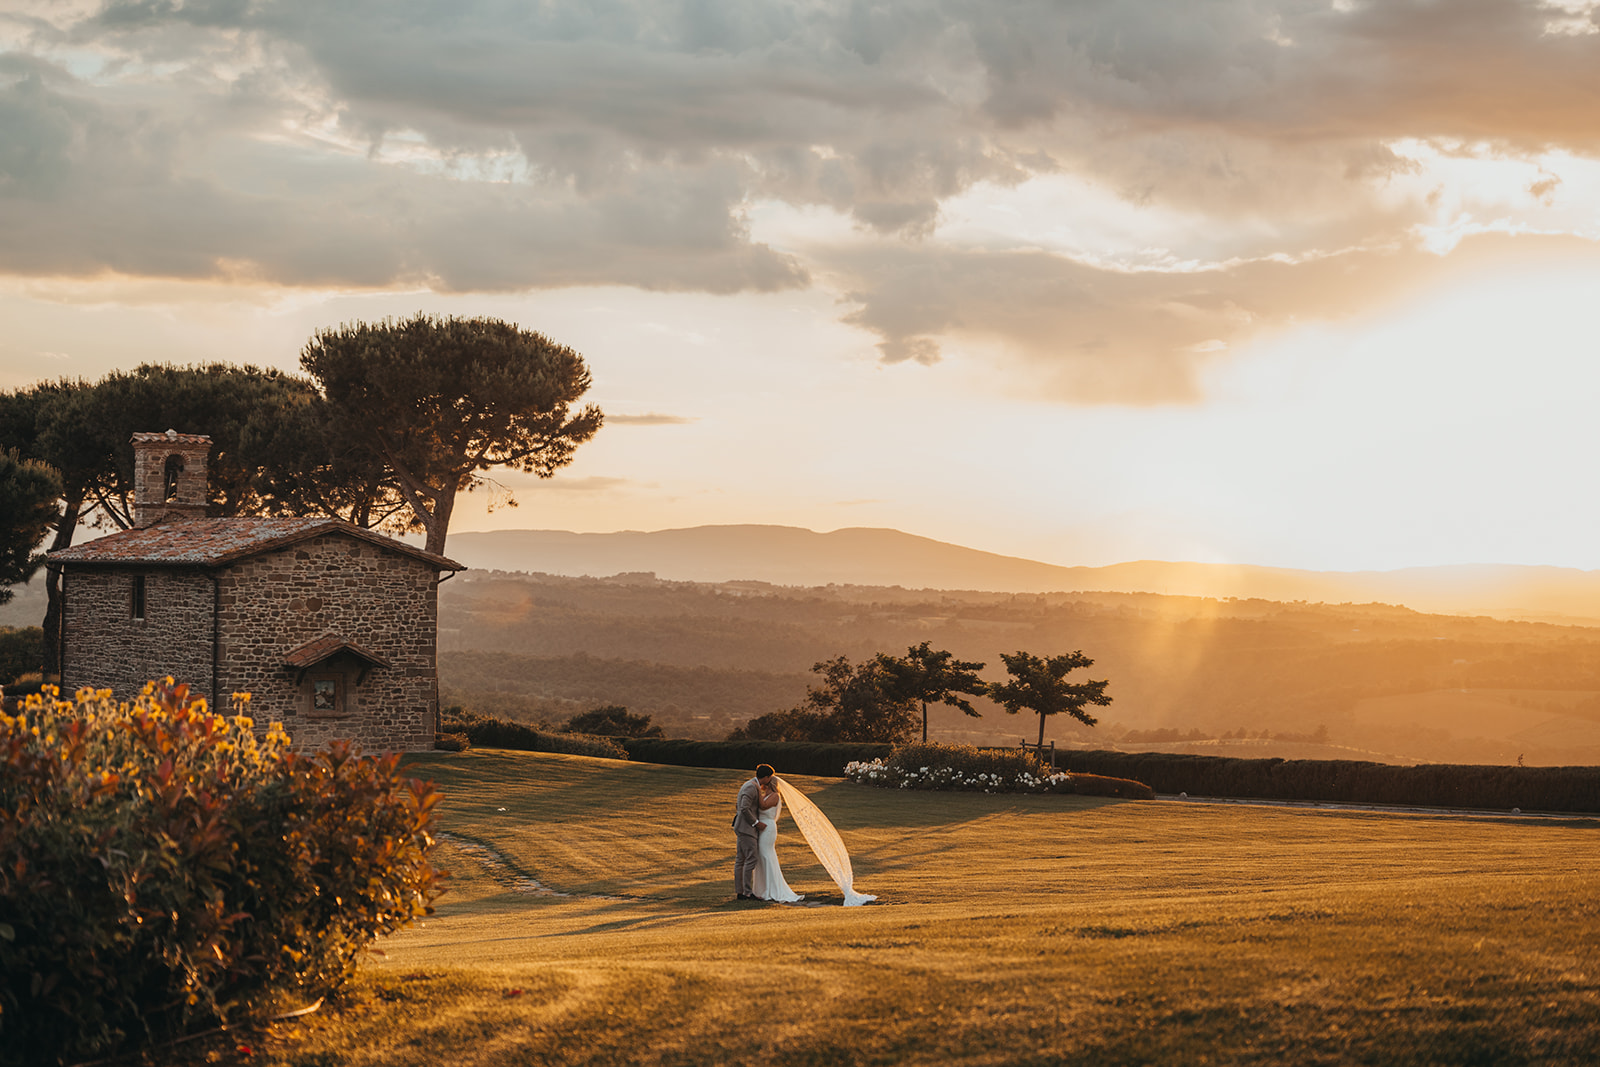 Landscape photo of a couple walking upon a hill at sunset, surrounded by rolling hills, with the bride and groom in the distance, the brides veil blowing in the evening wind